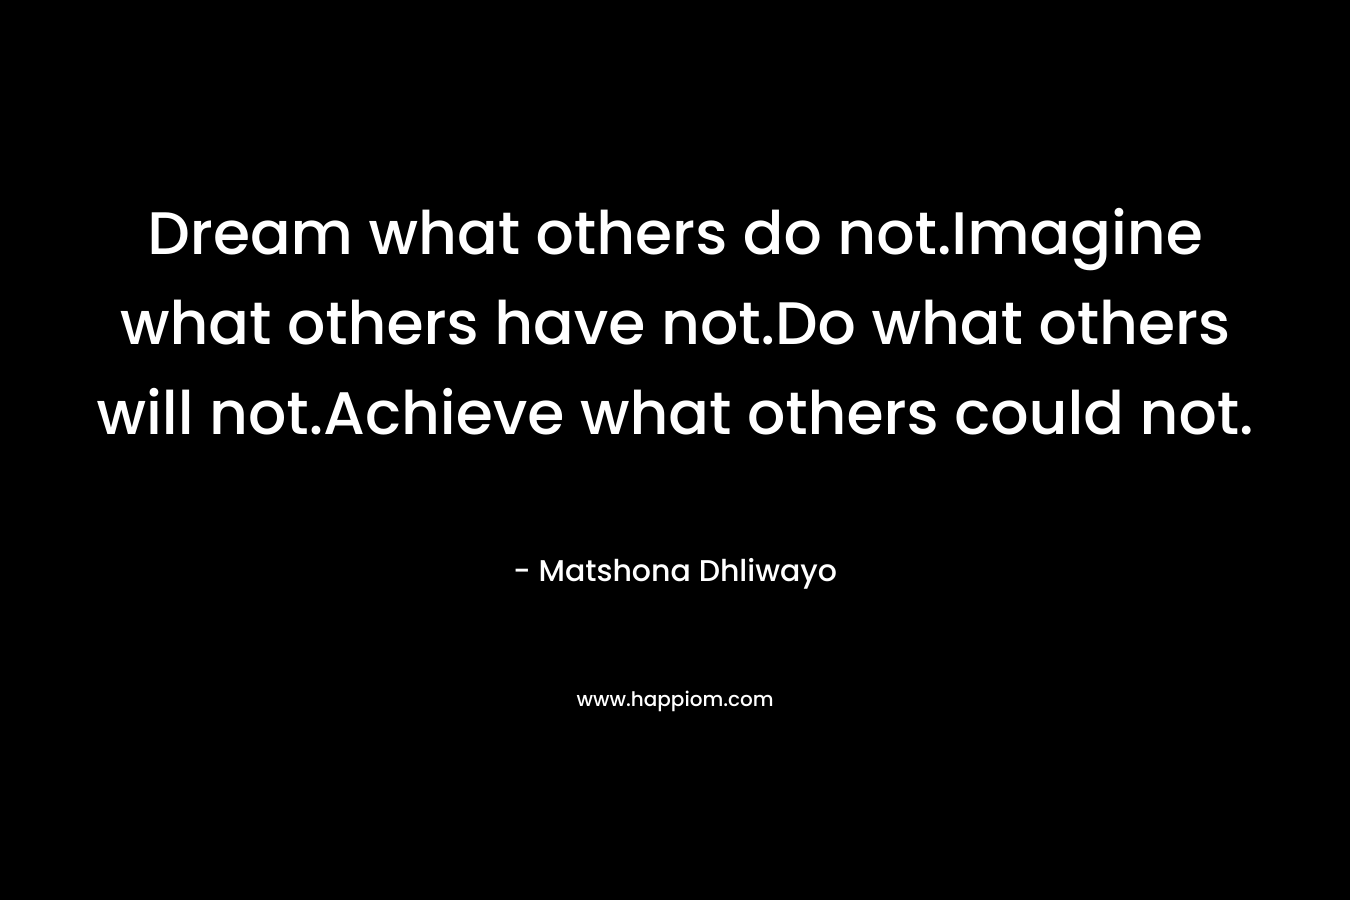 Dream what others do not.Imagine what others have not.Do what others will not.Achieve what others could not.